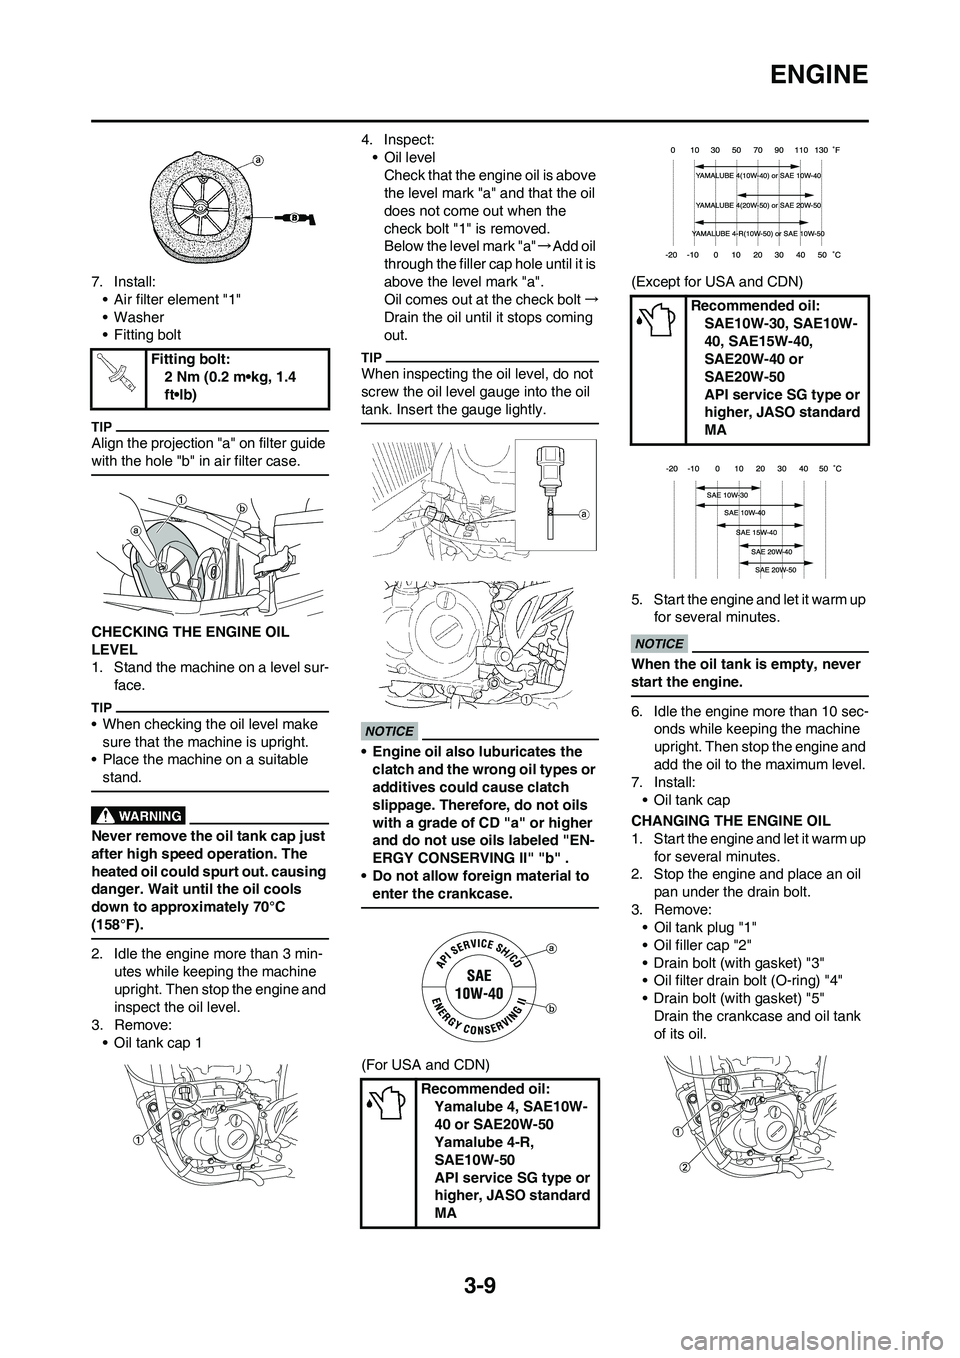 YAMAHA YZ450F 2009  Owners Manual 3-9
ENGINE
7. Install:
• Air filter element "1"
• Washer
• Fitting bolt
Align the projection "a" on filter guide 
with the hole "b" in air filter case.
CHECKING THE ENGINE OIL 
LEVEL
1. Stand th